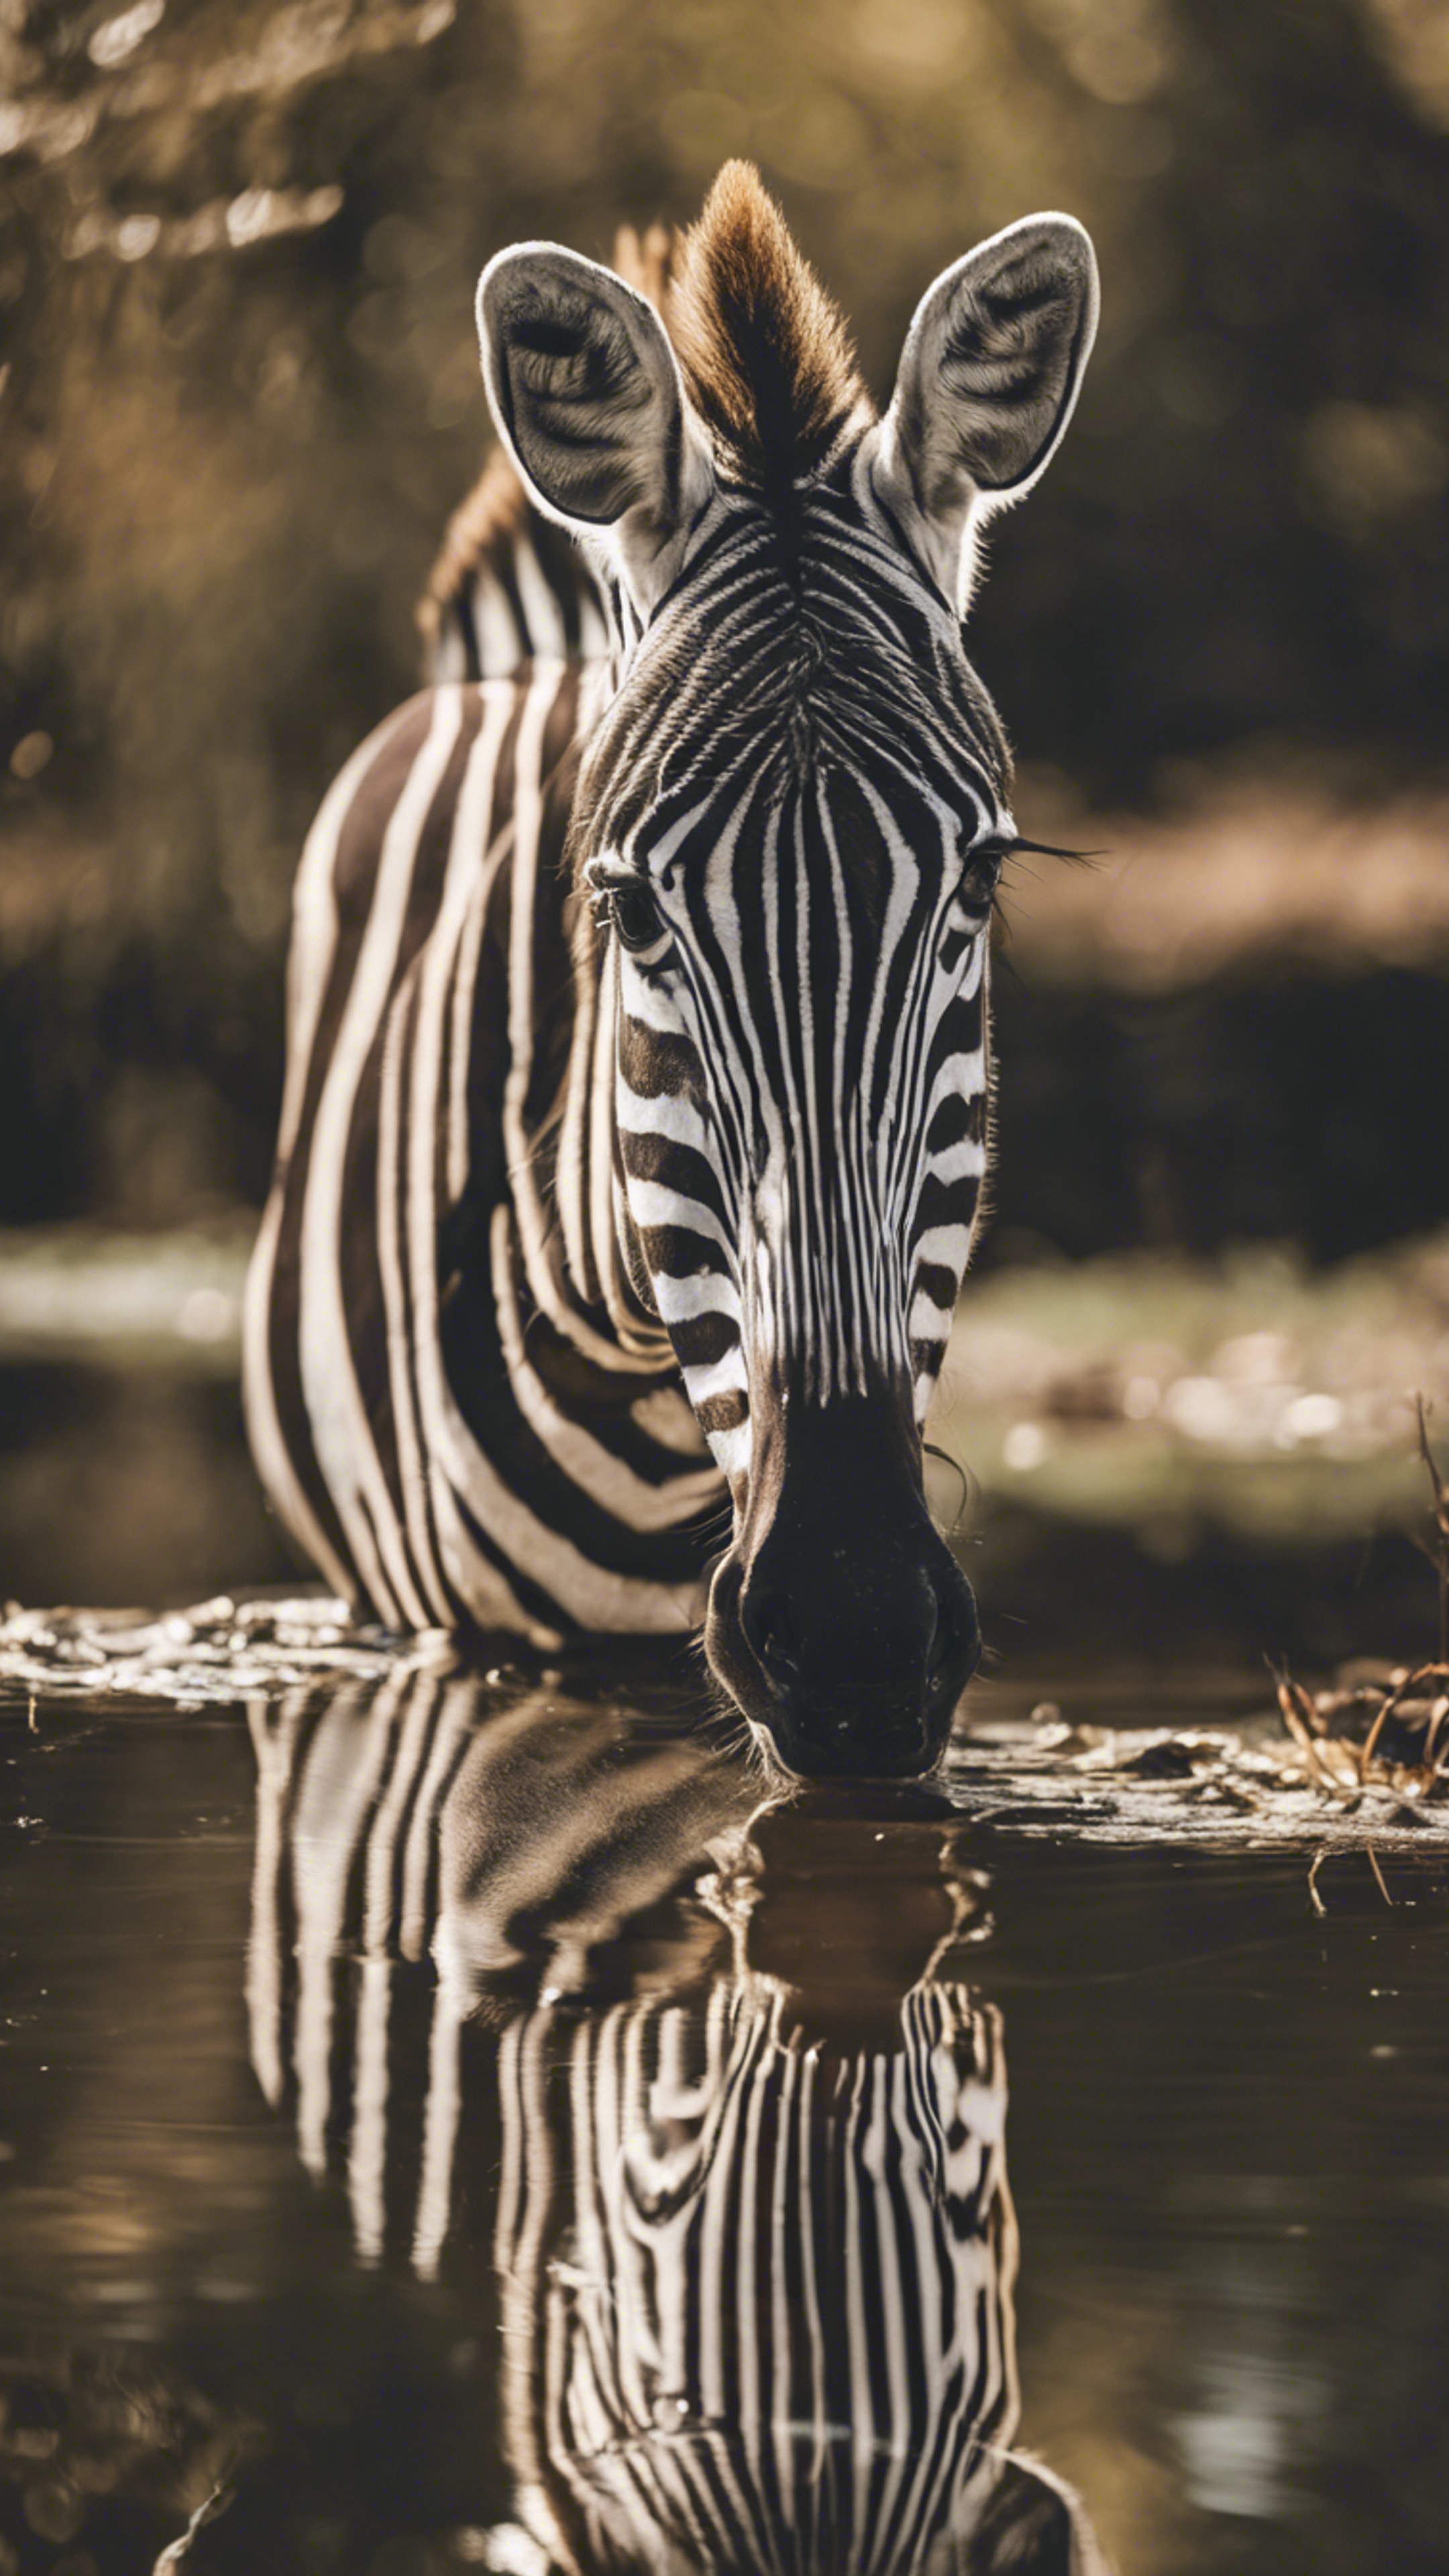 A zebra's beautiful reflection in the still waters of a calm pond.壁紙[d51ed46119a14e43ab31]